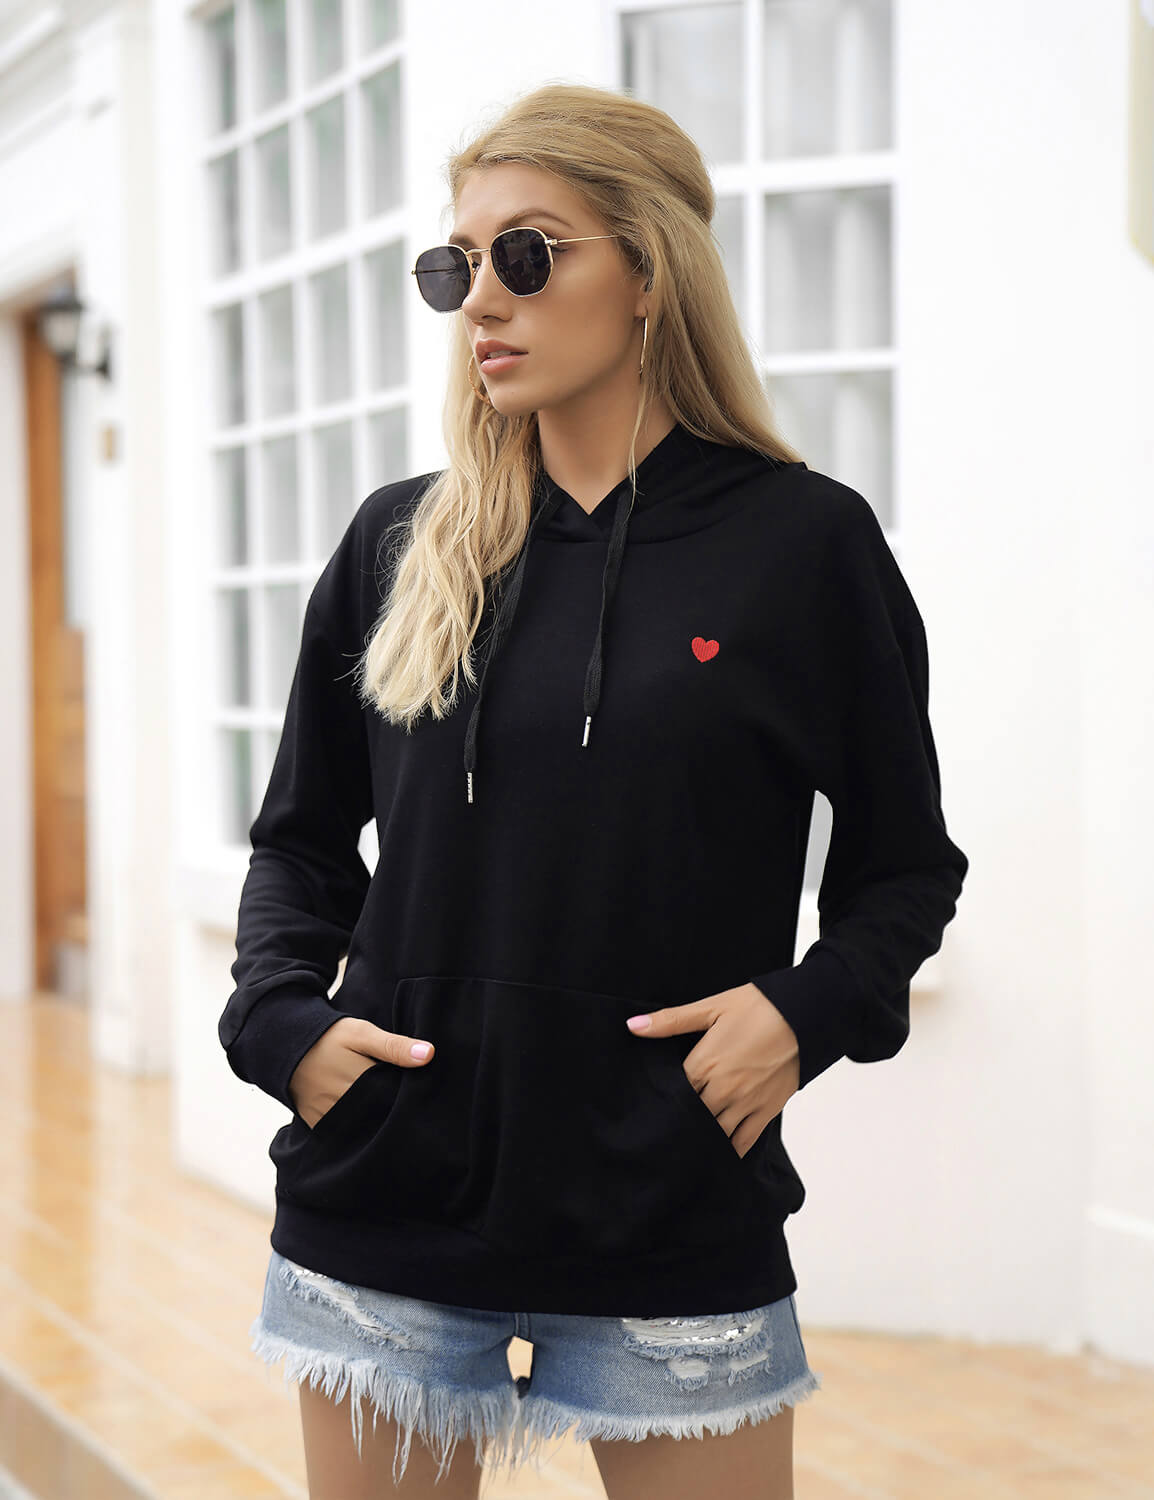 Blooming Jelly_Casual Heart Embroidery Hoodie_Black_305094_02_Fall Fashion Women's Outfits_Tops_Sweatshirt